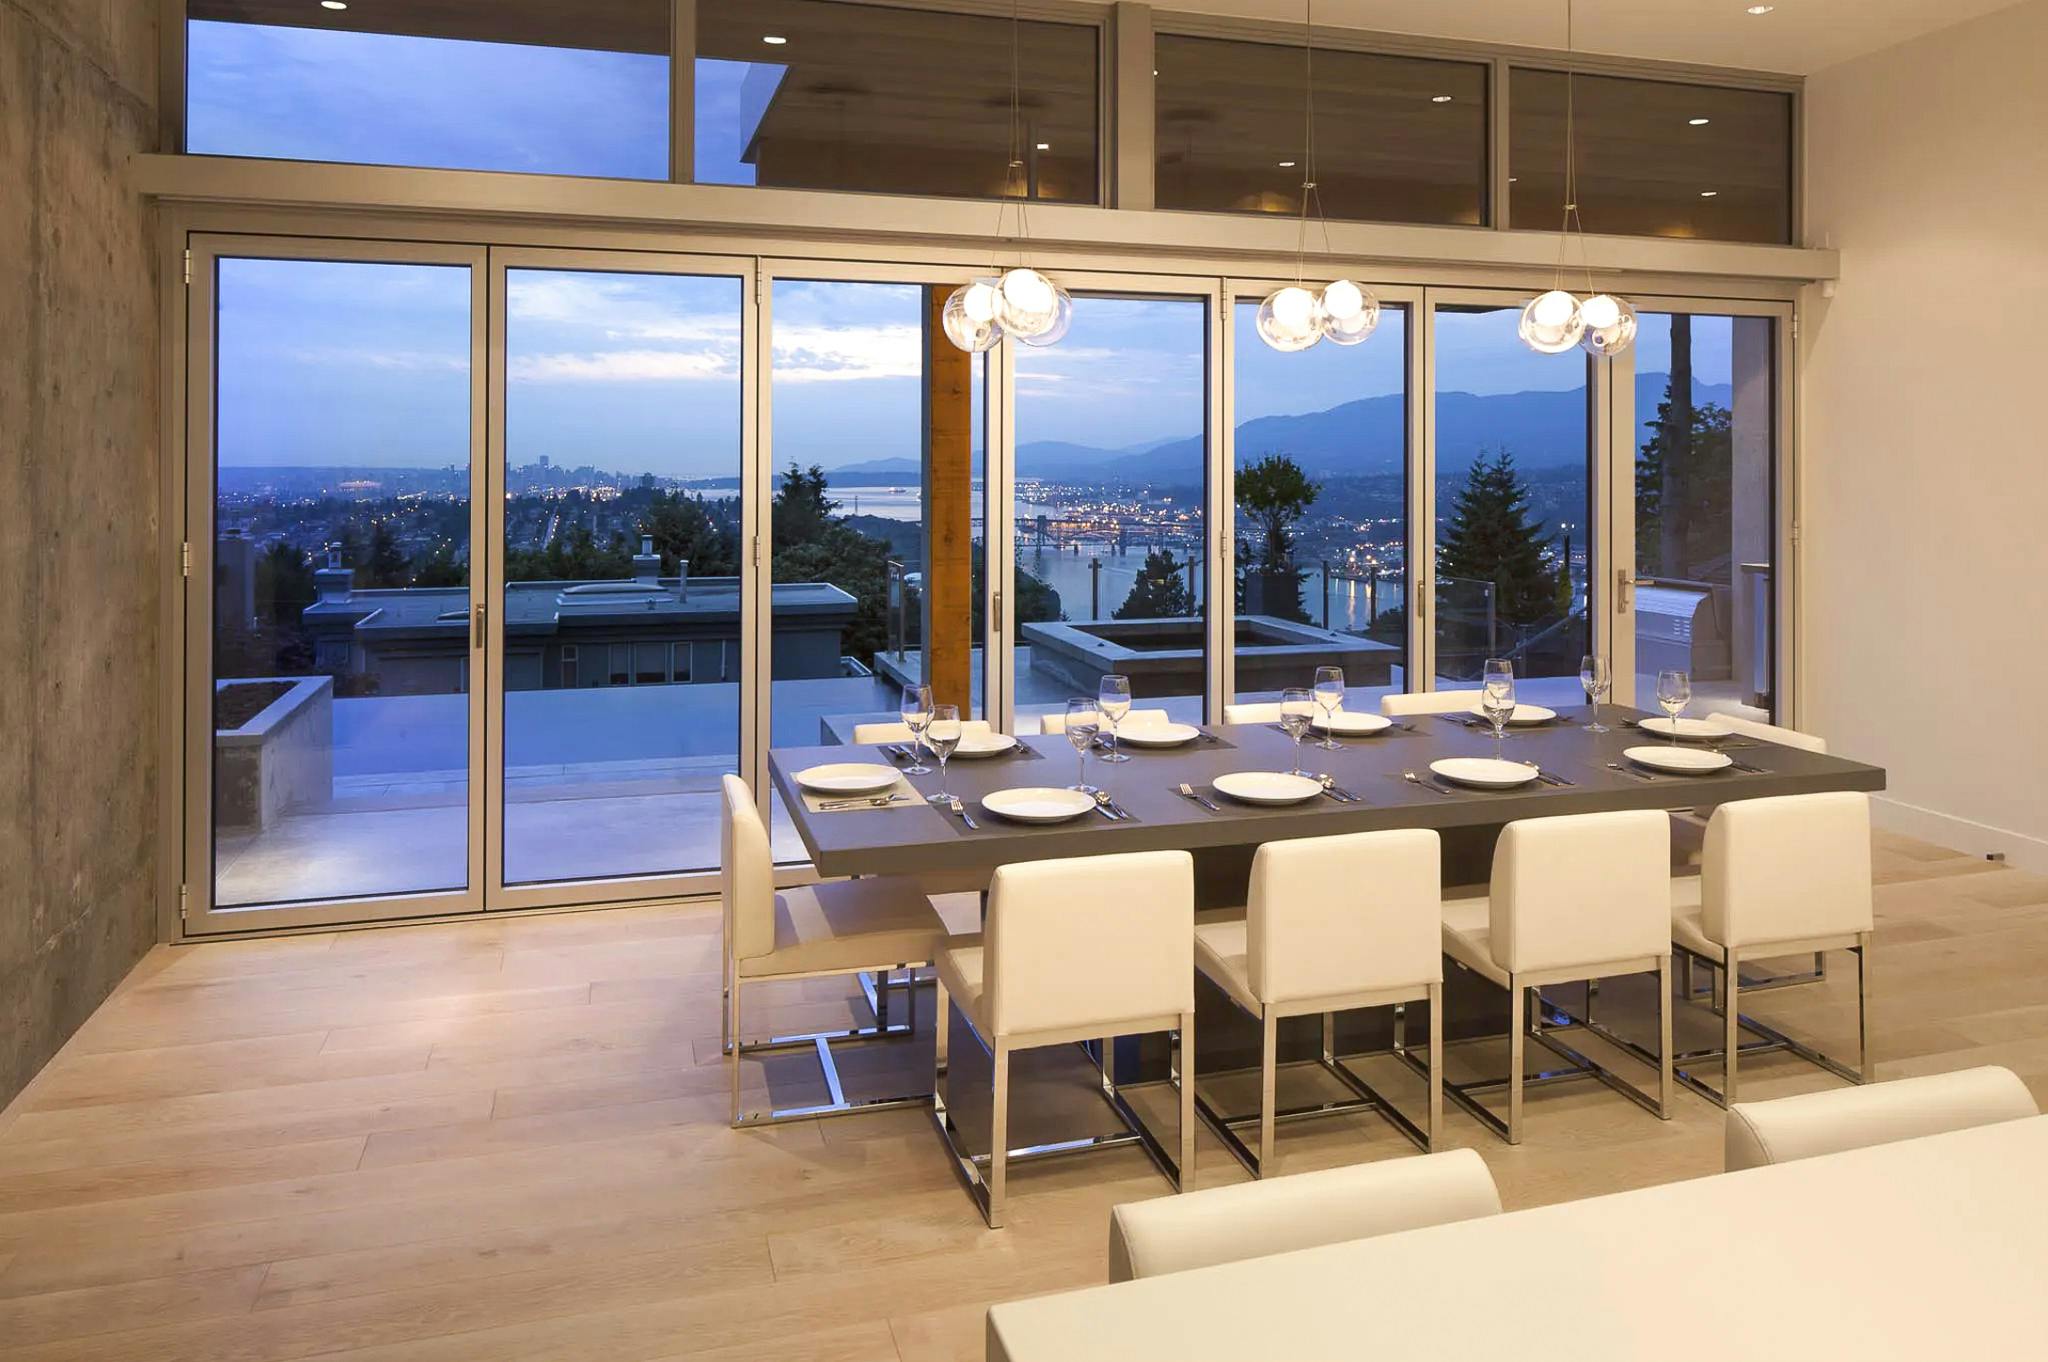 endless view with NanaWall folding glass patio doors